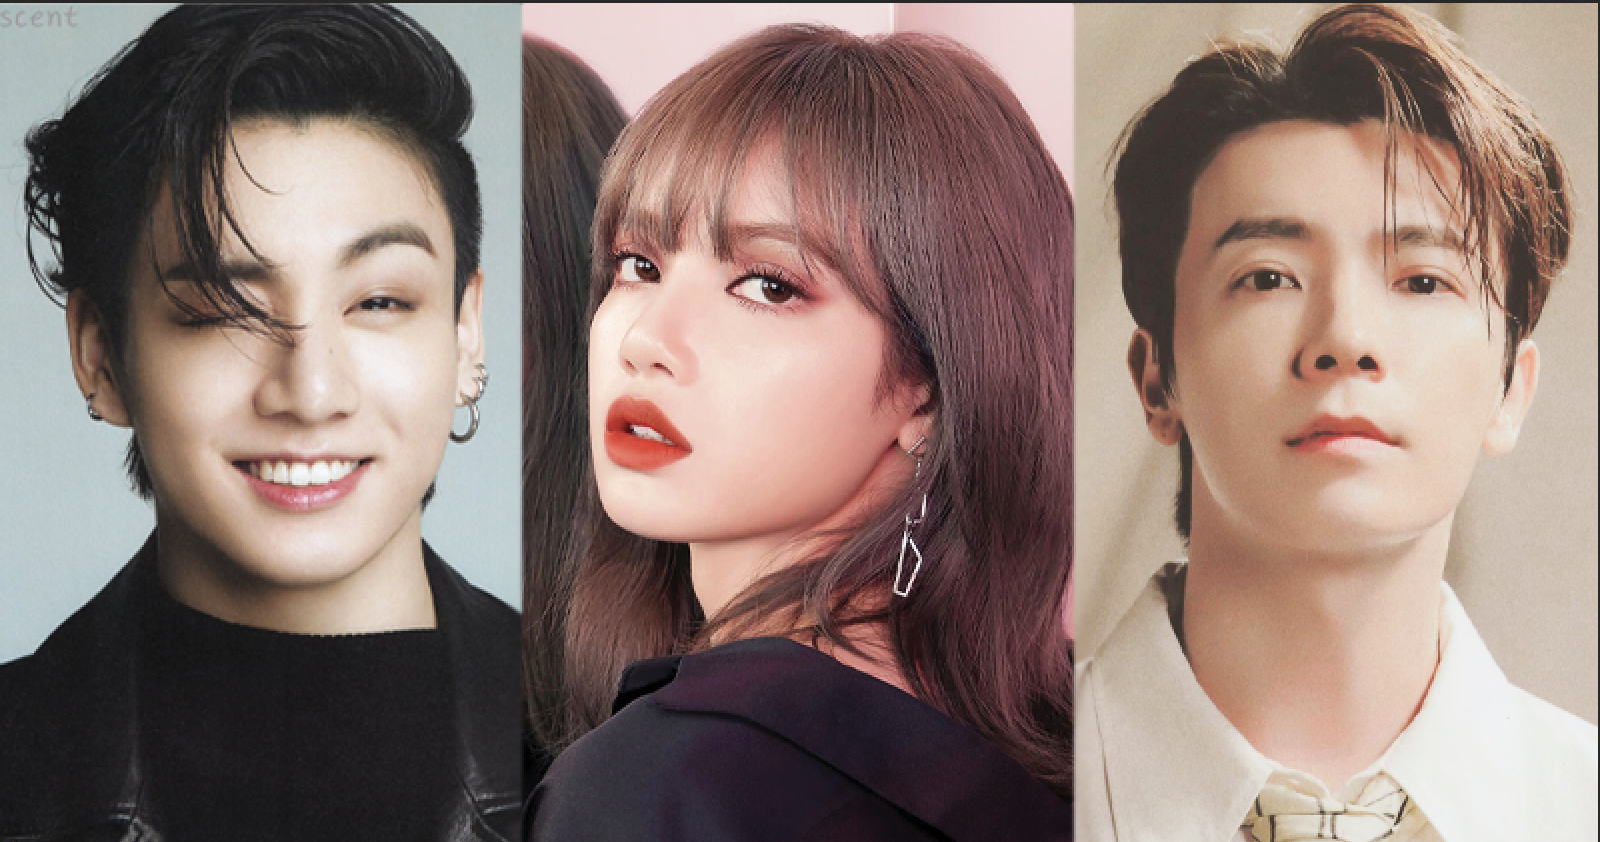 Dabeme Pop Releases 'Best Artists' From 2005 to 2020 List With BTS, BLACKPINK And More